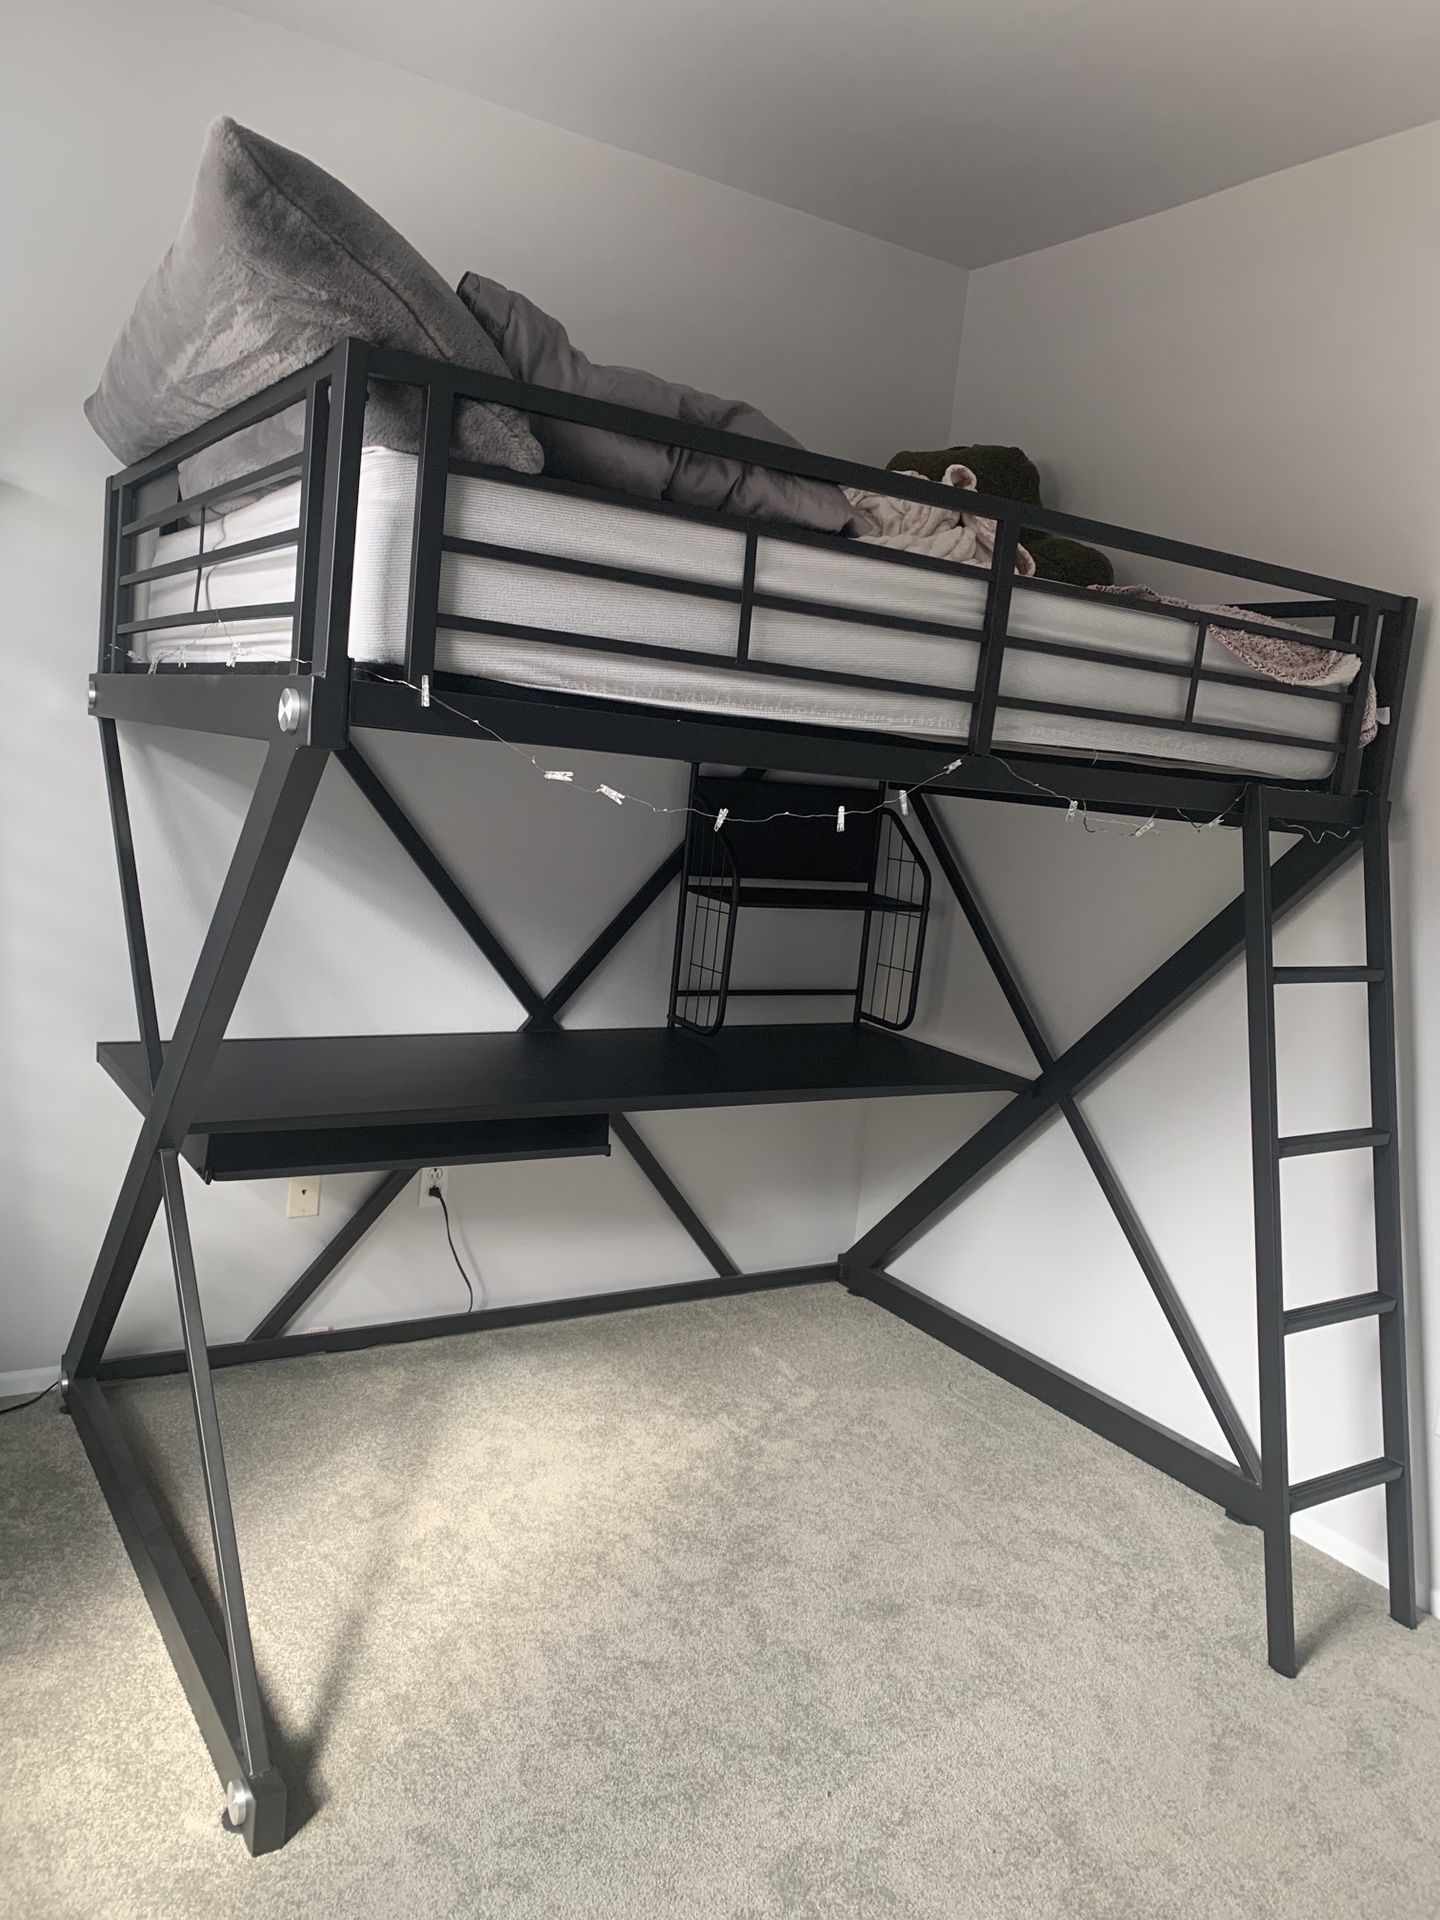 Iron bunk bed and desk combination - full size bed